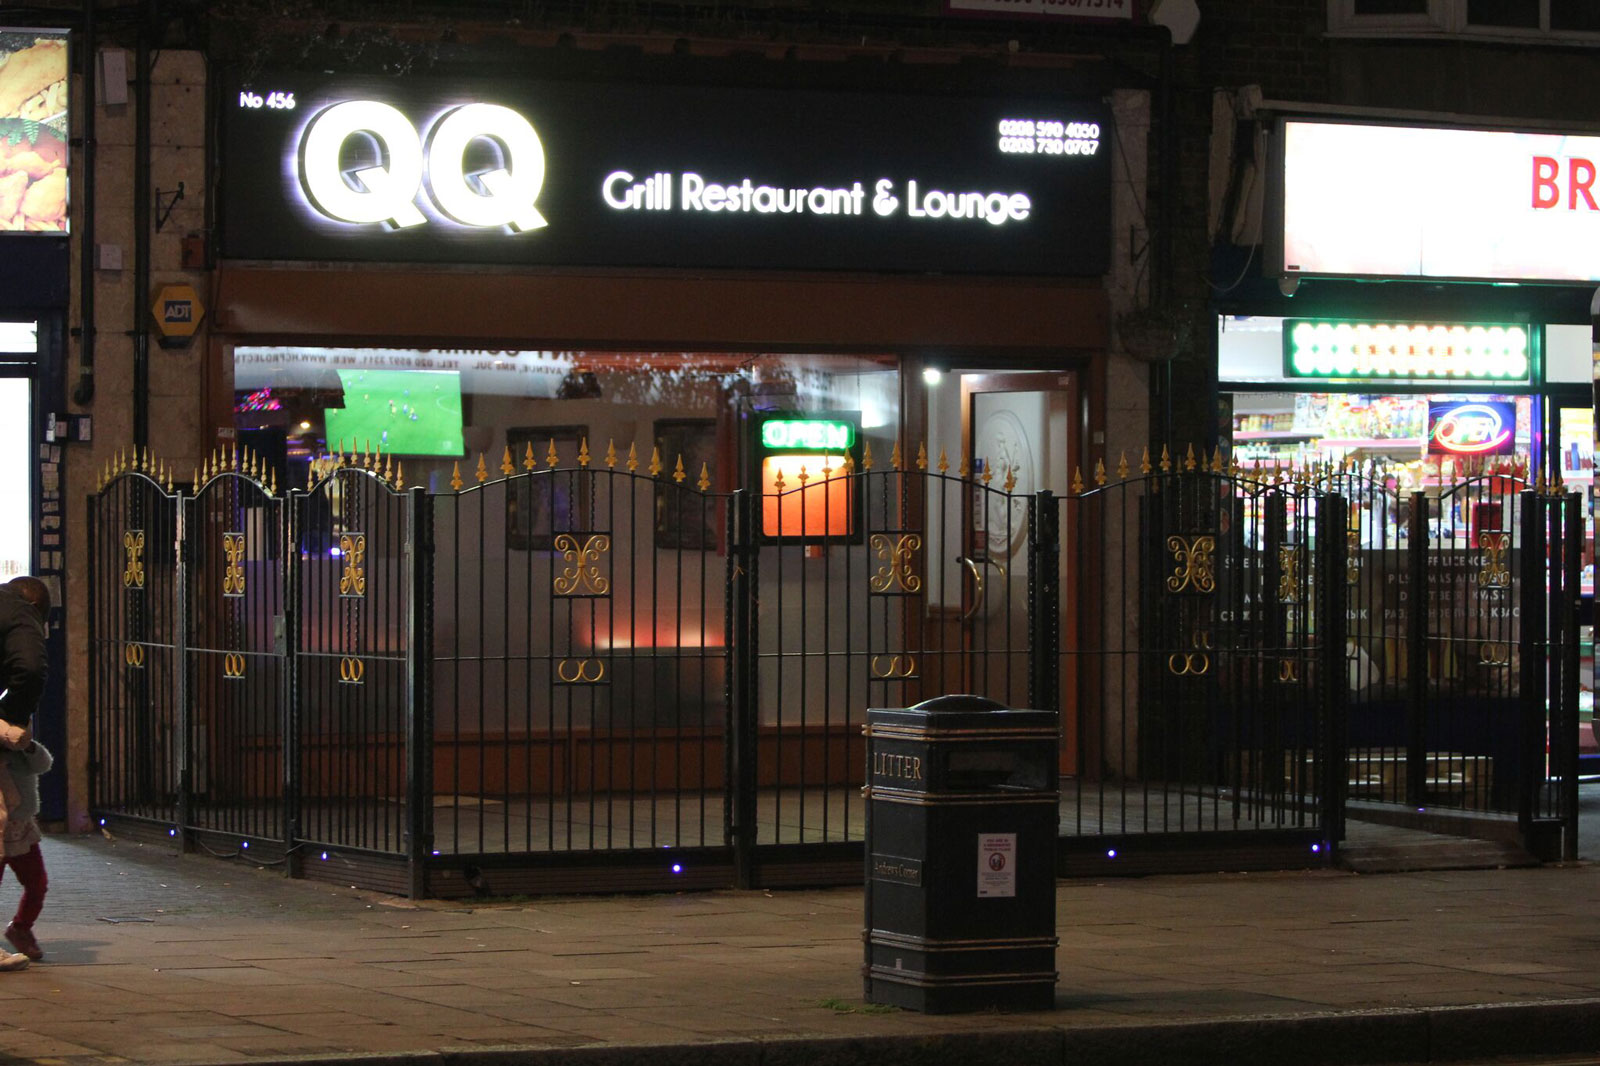 qqlounge grill restaurant and lounge